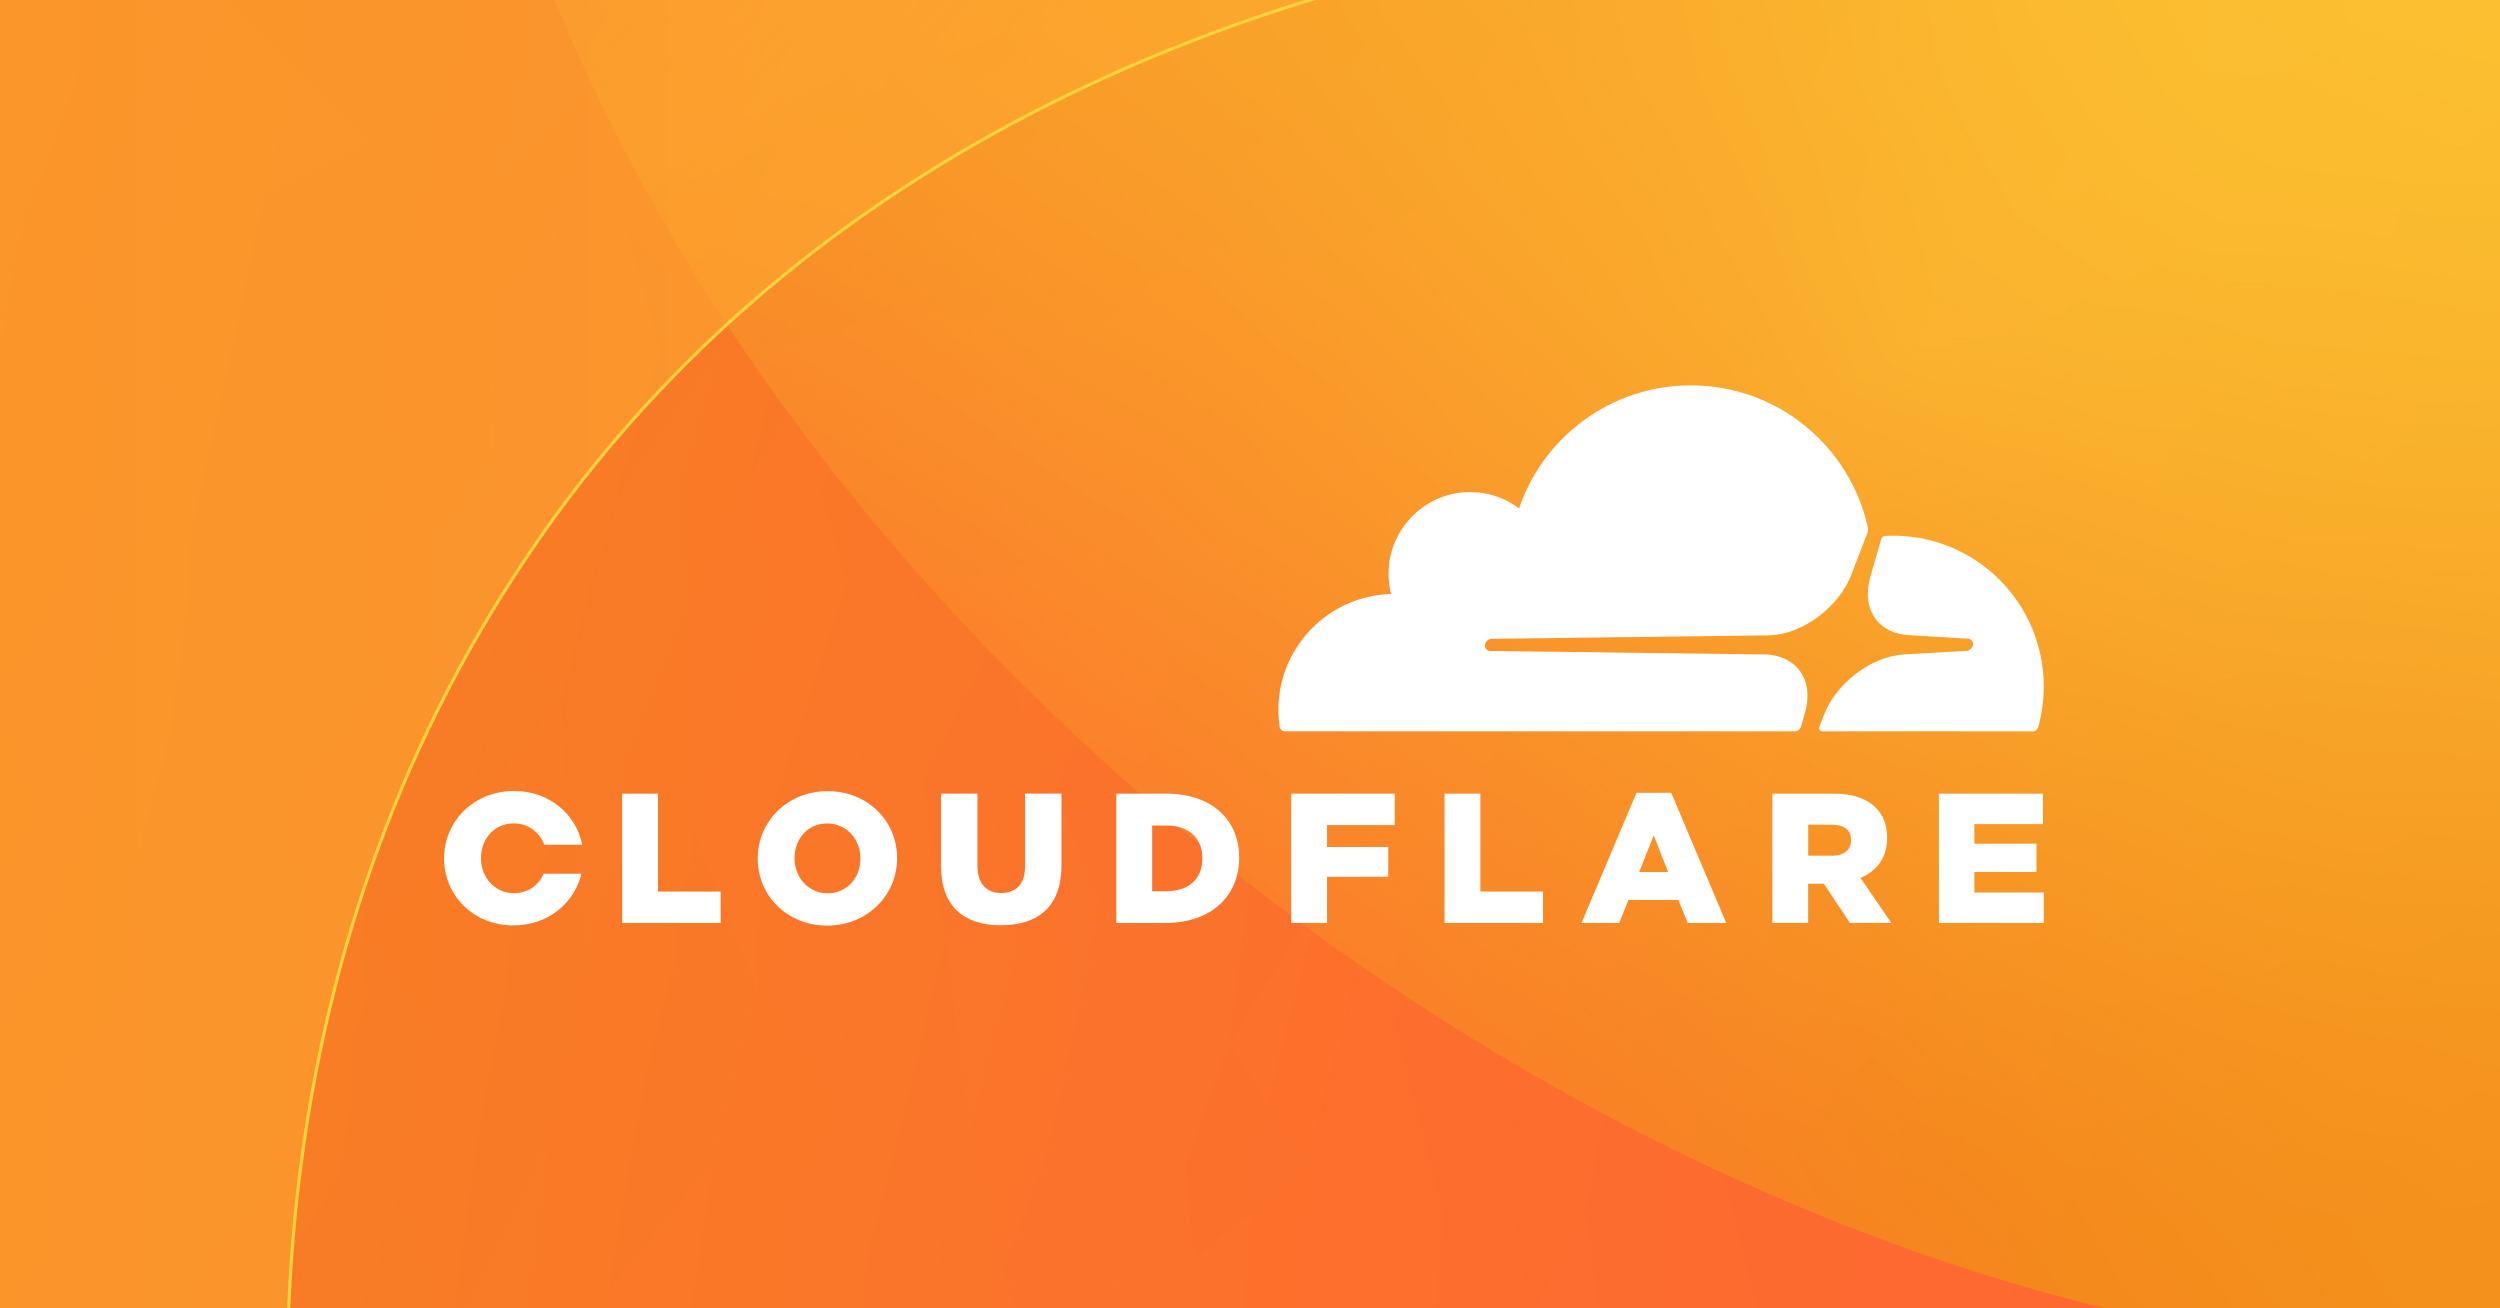 Cloudflare - The Web Performance & Security Company | Cloudflare